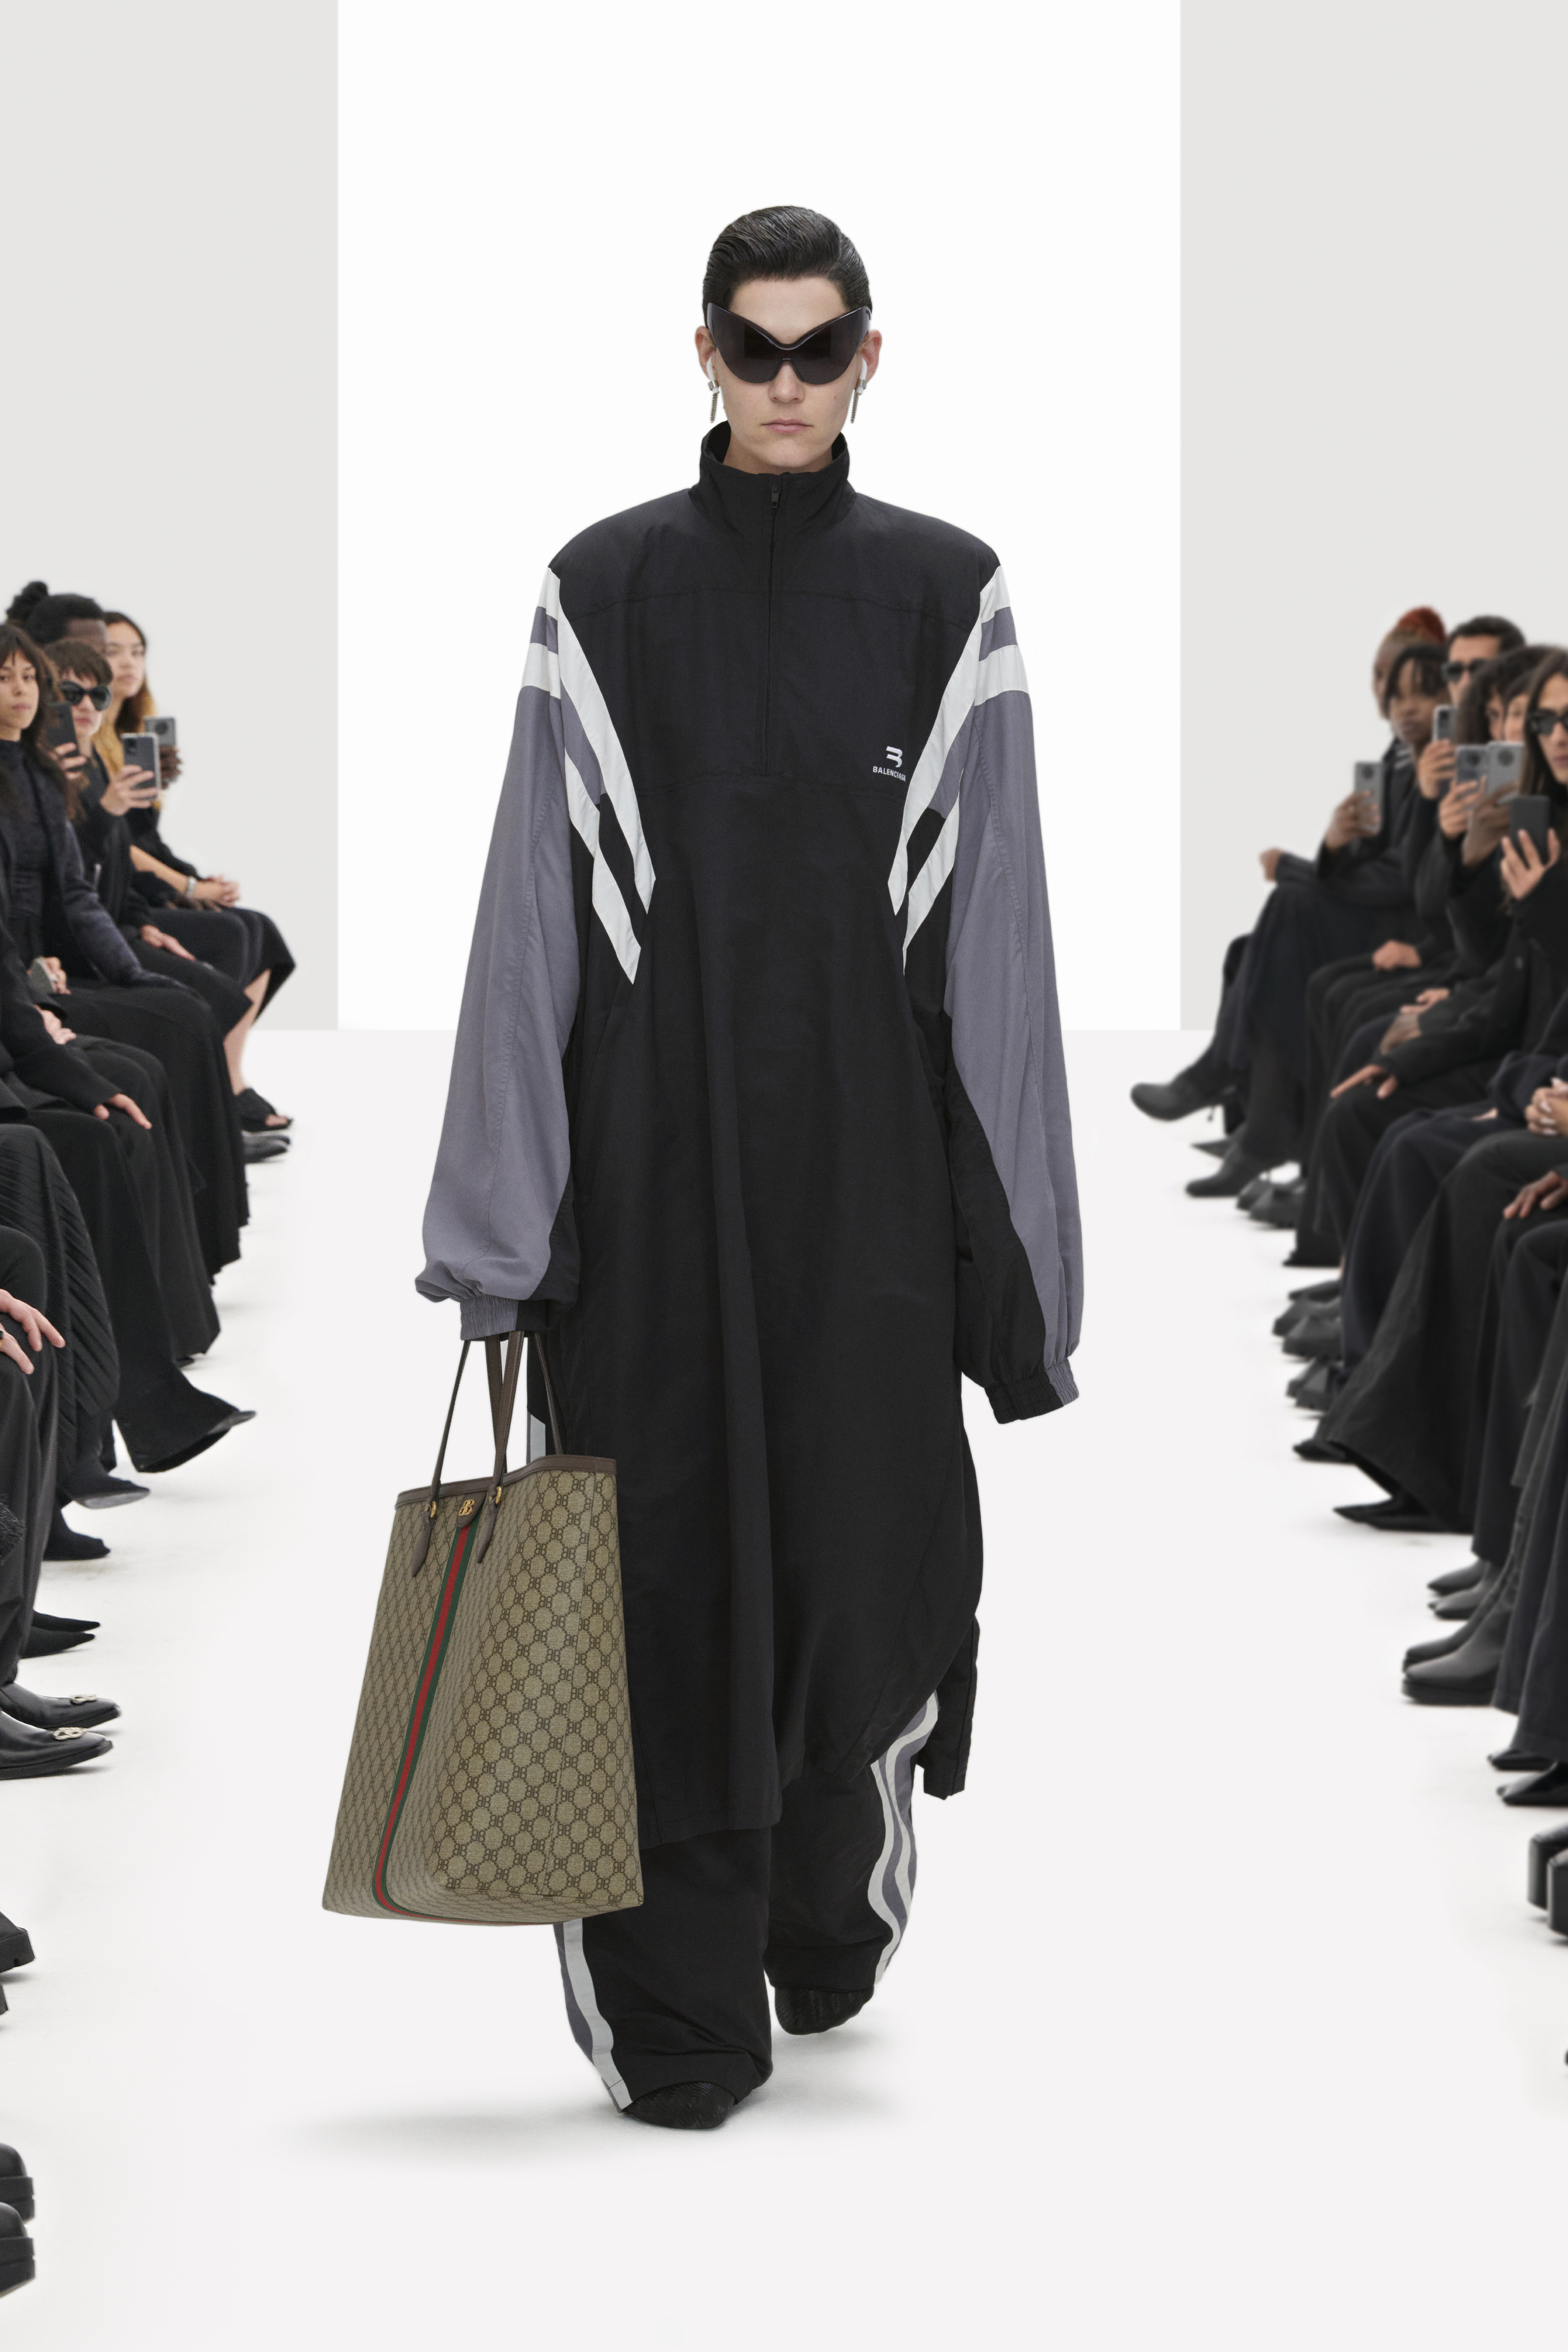 Balenciaga Interpreted Gucci Products for Its Spring 2022 Collection – WWD